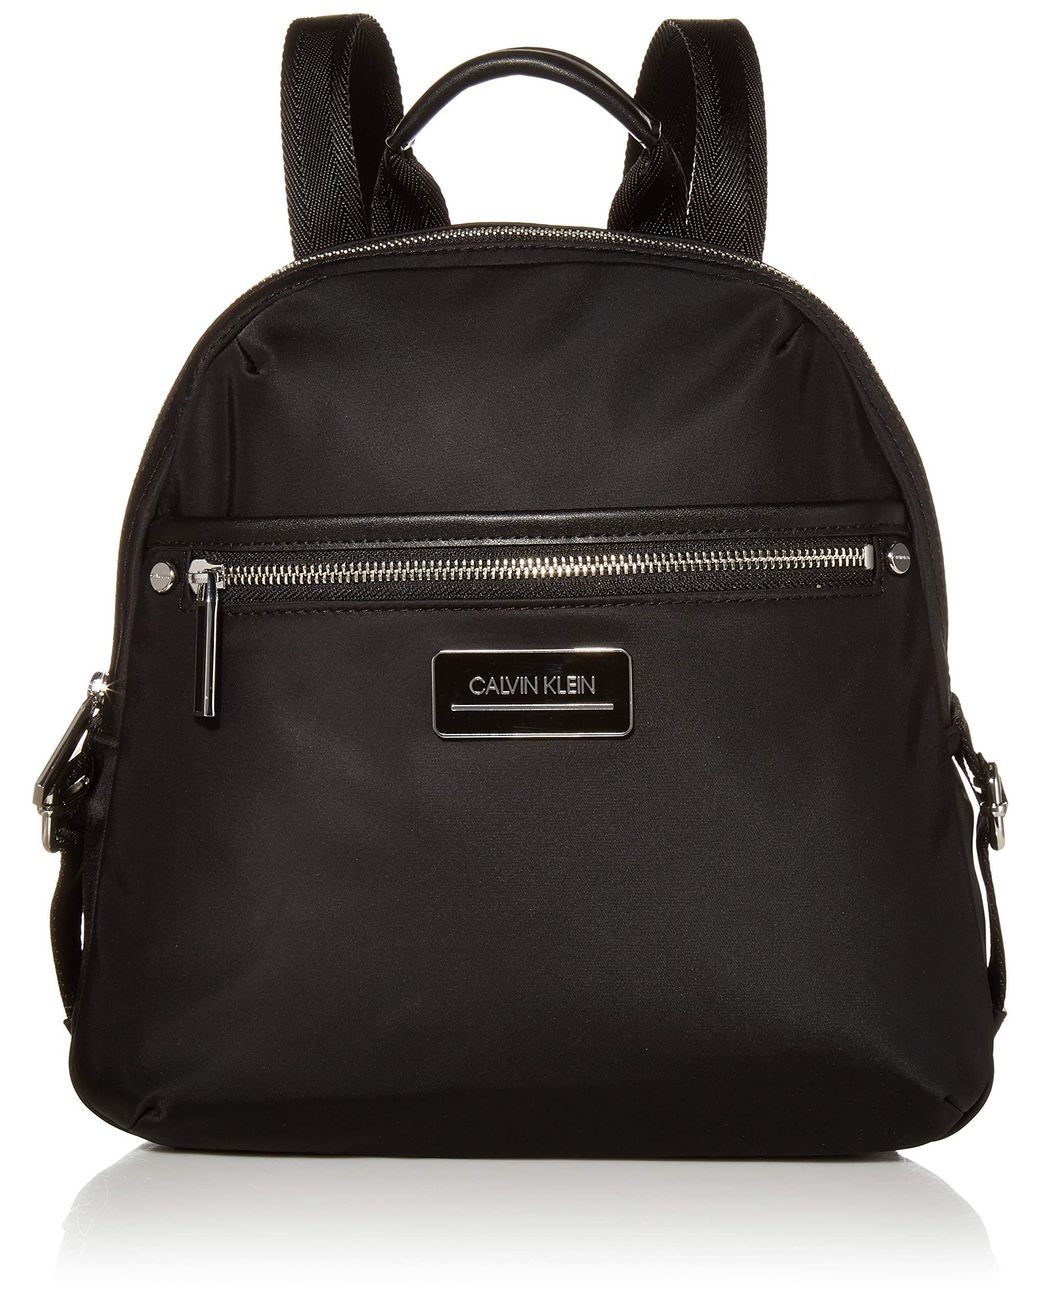 Calvin Klein Synthetic Sussex Nylon Backpack in Black/Silver 